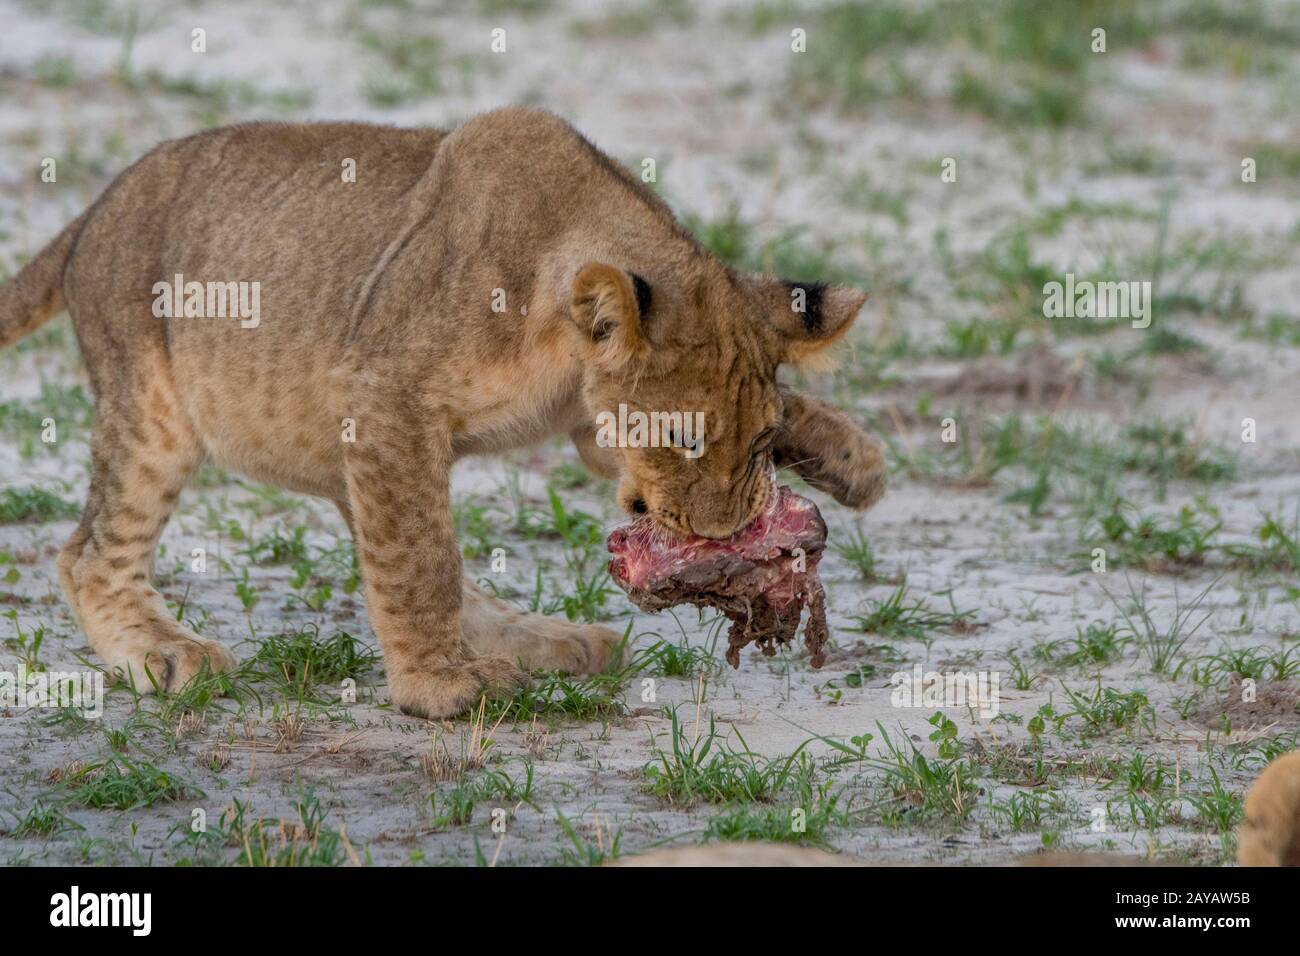 A About 6 Months Old Lion Cub Panthera Leo Is Feeding On A Warthog In The Gomoti Plains Area A Community Run Concession On The Edge Of The Gomoti Stock Photo Alamy